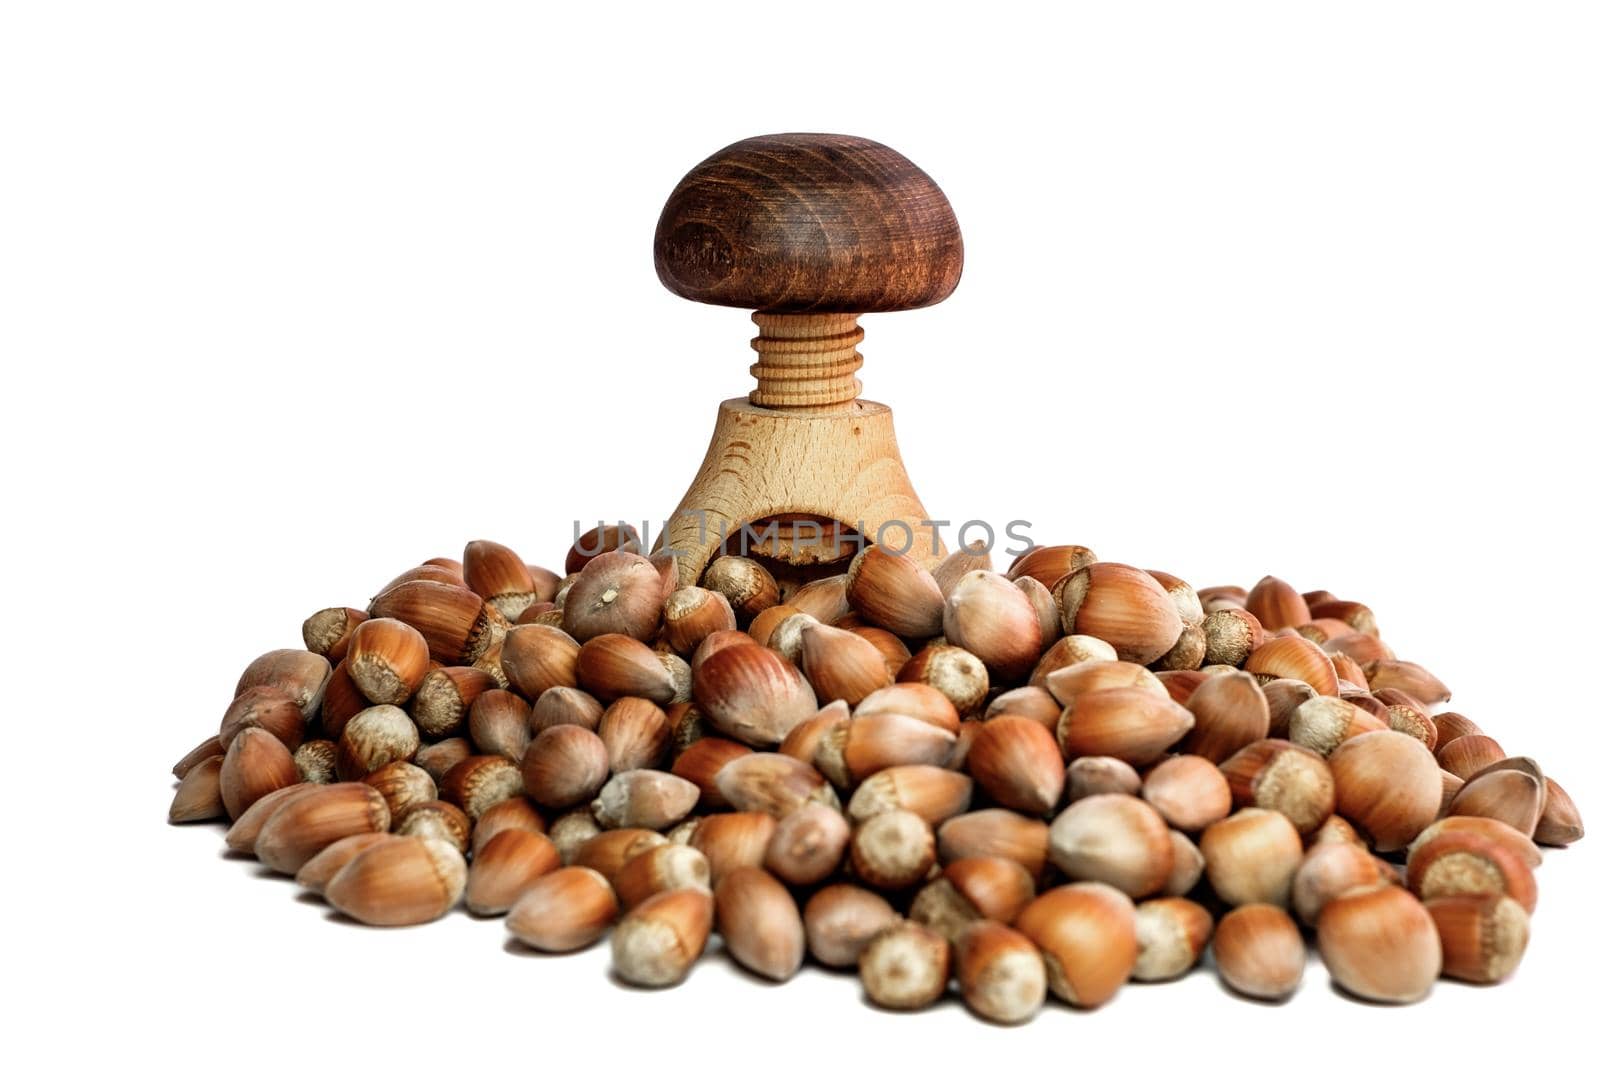 wooden nutcracker and hazelnuts on white background by Roberto